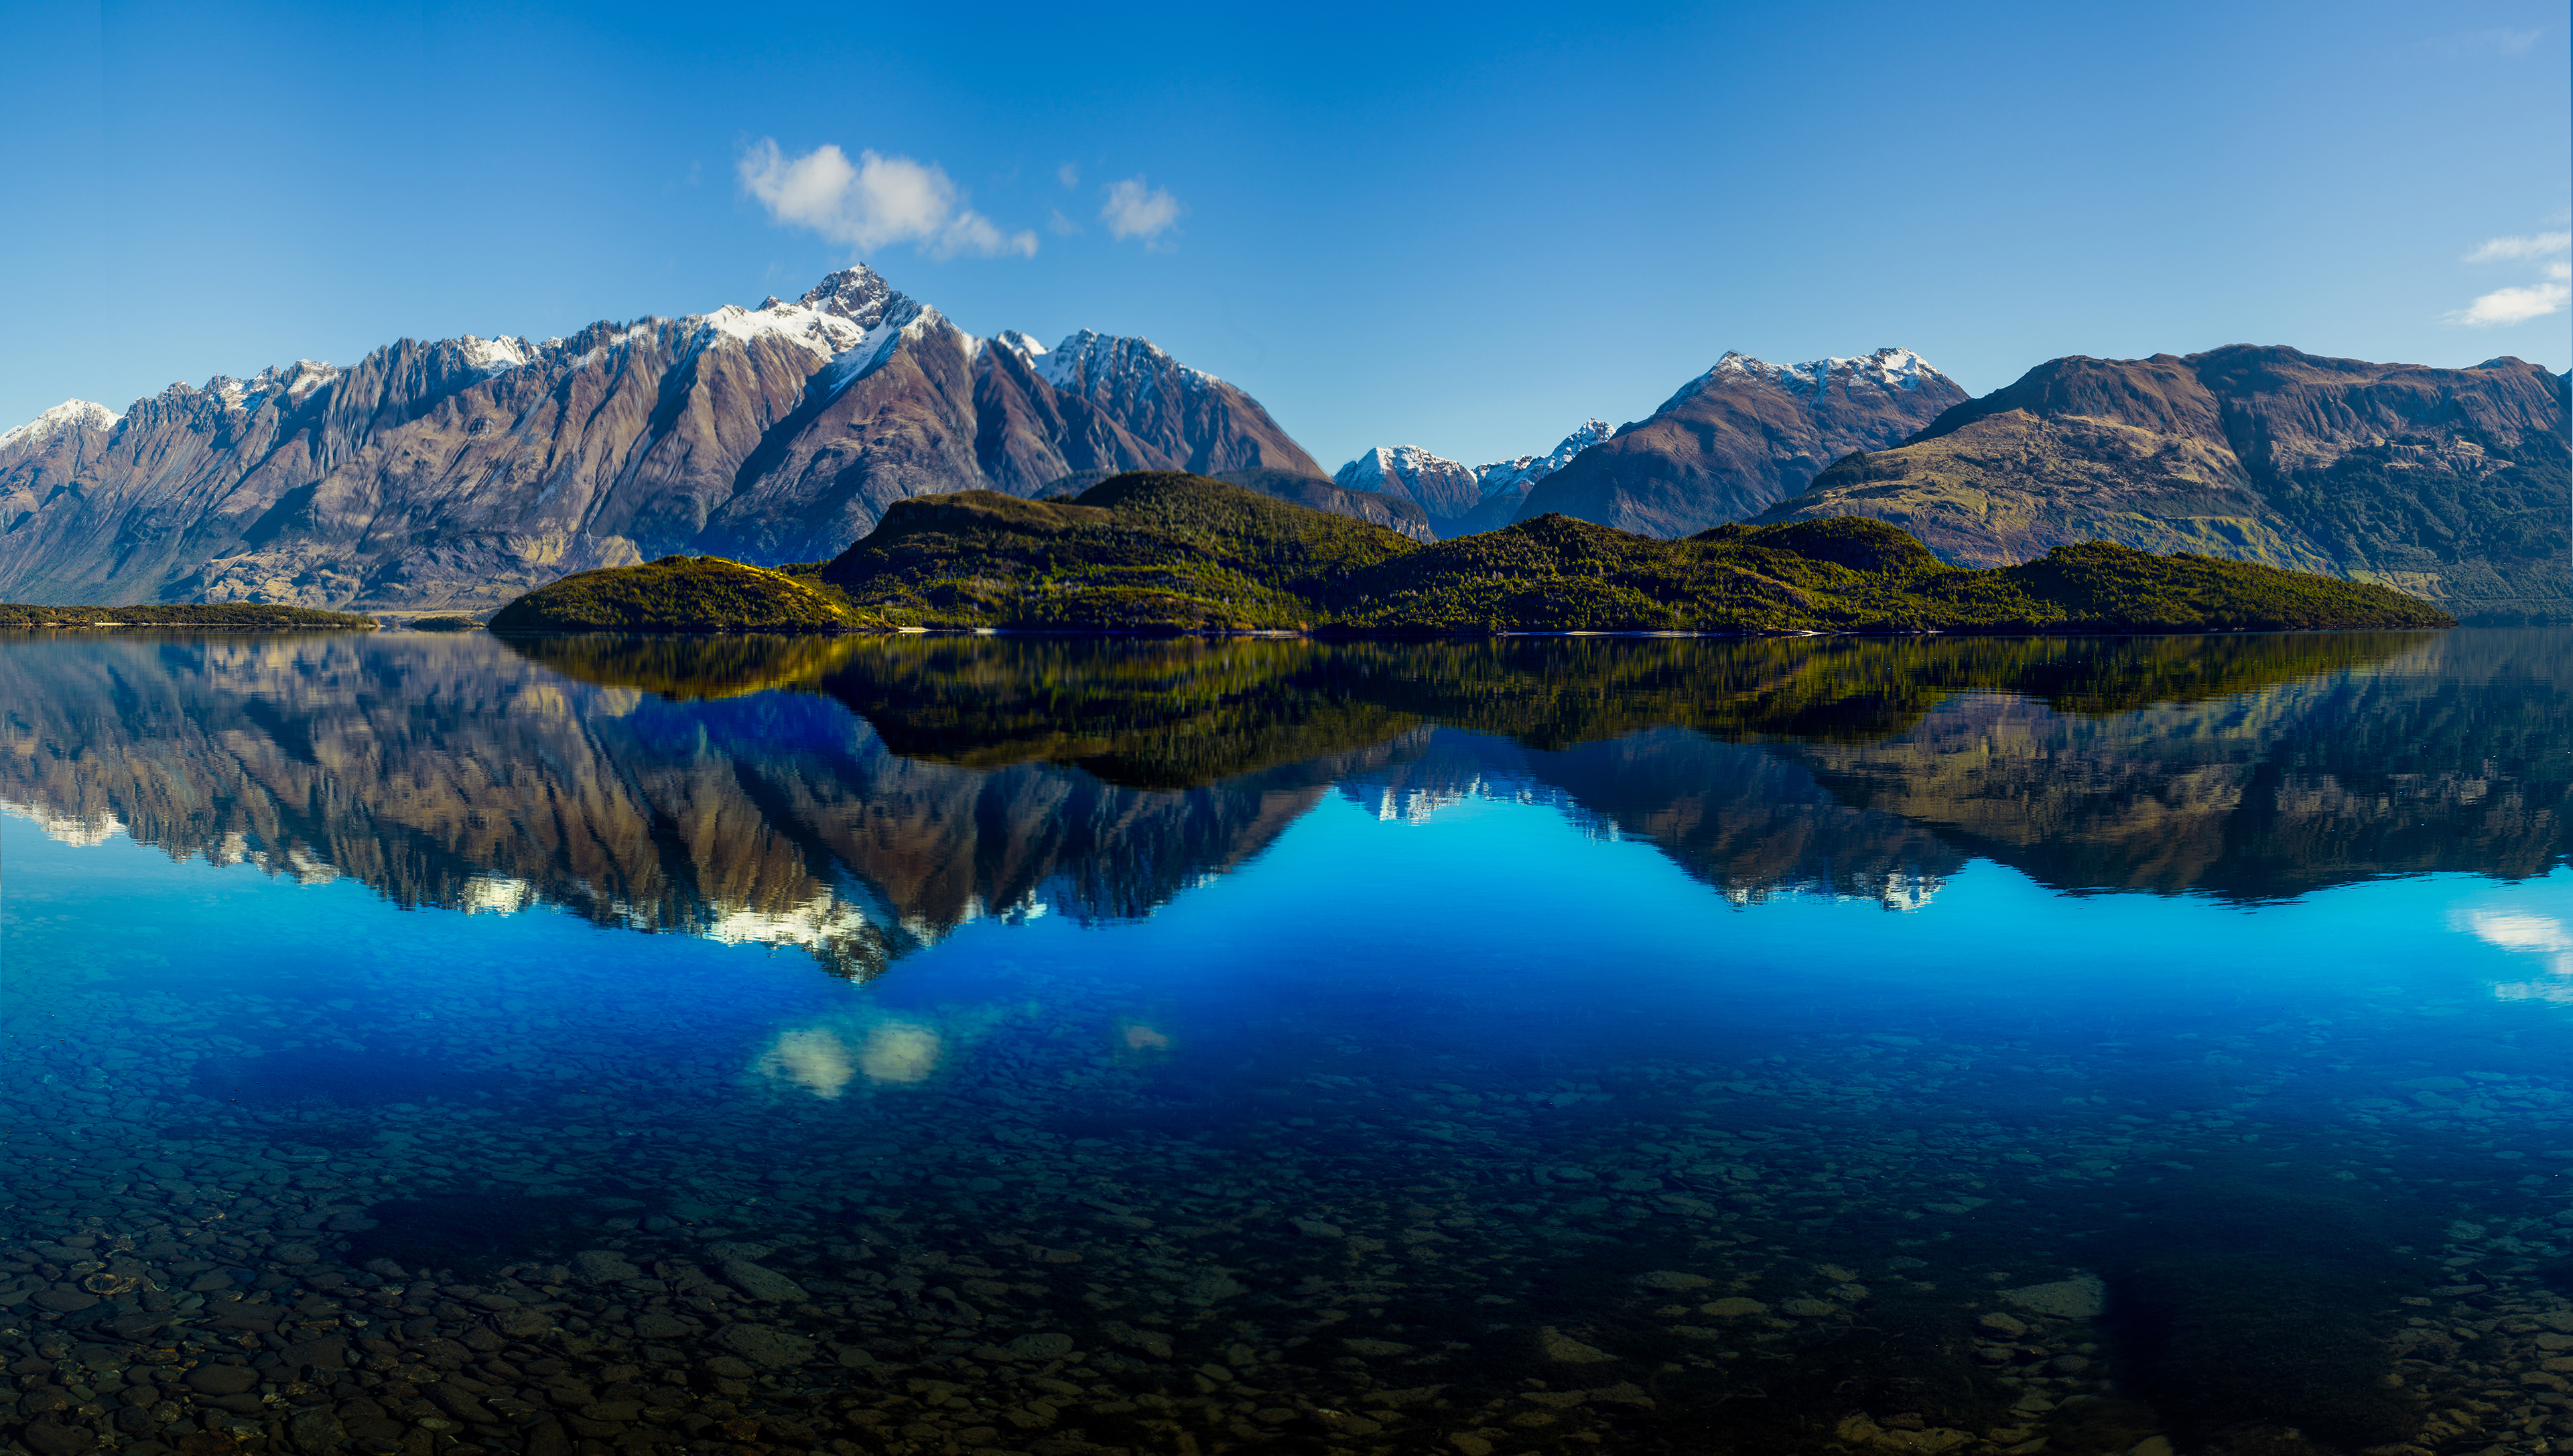 General 3840x2173 nature lake mountains reflection water snow sky clouds landscape New Zealand Glenorchy Trey Ratcliff